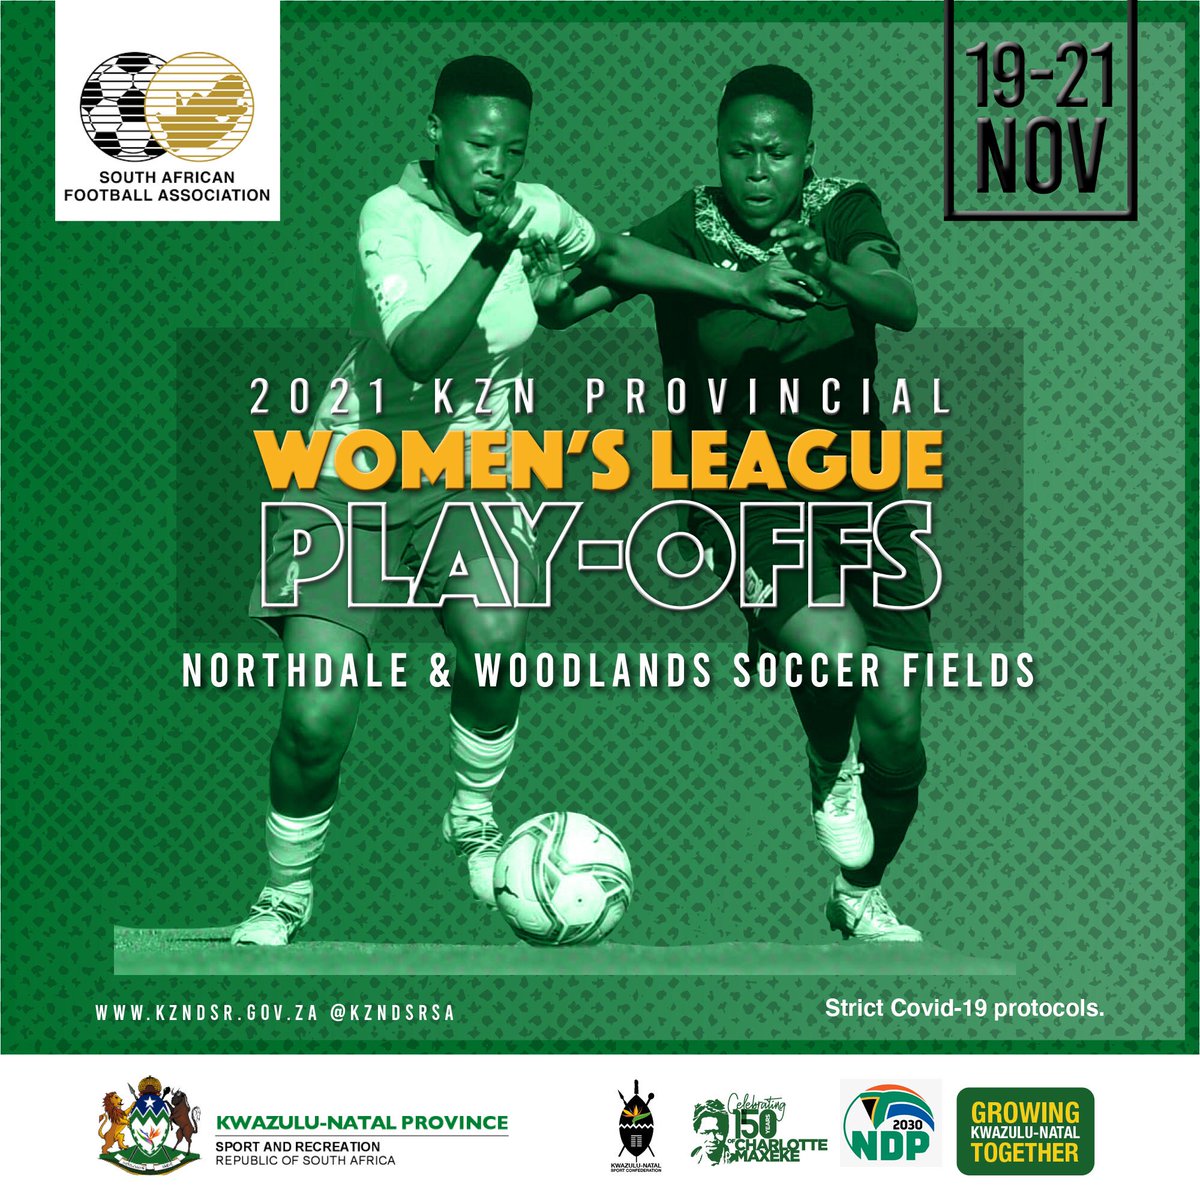 This weekend KZN Football Association in partnership with the KZN Department of Sport and Recreation will host the KZN Regional Women’s League playoffs in Northdale and Woodlands, Pietermaritzburg. #ActiveandwinningKZN #KZNRising